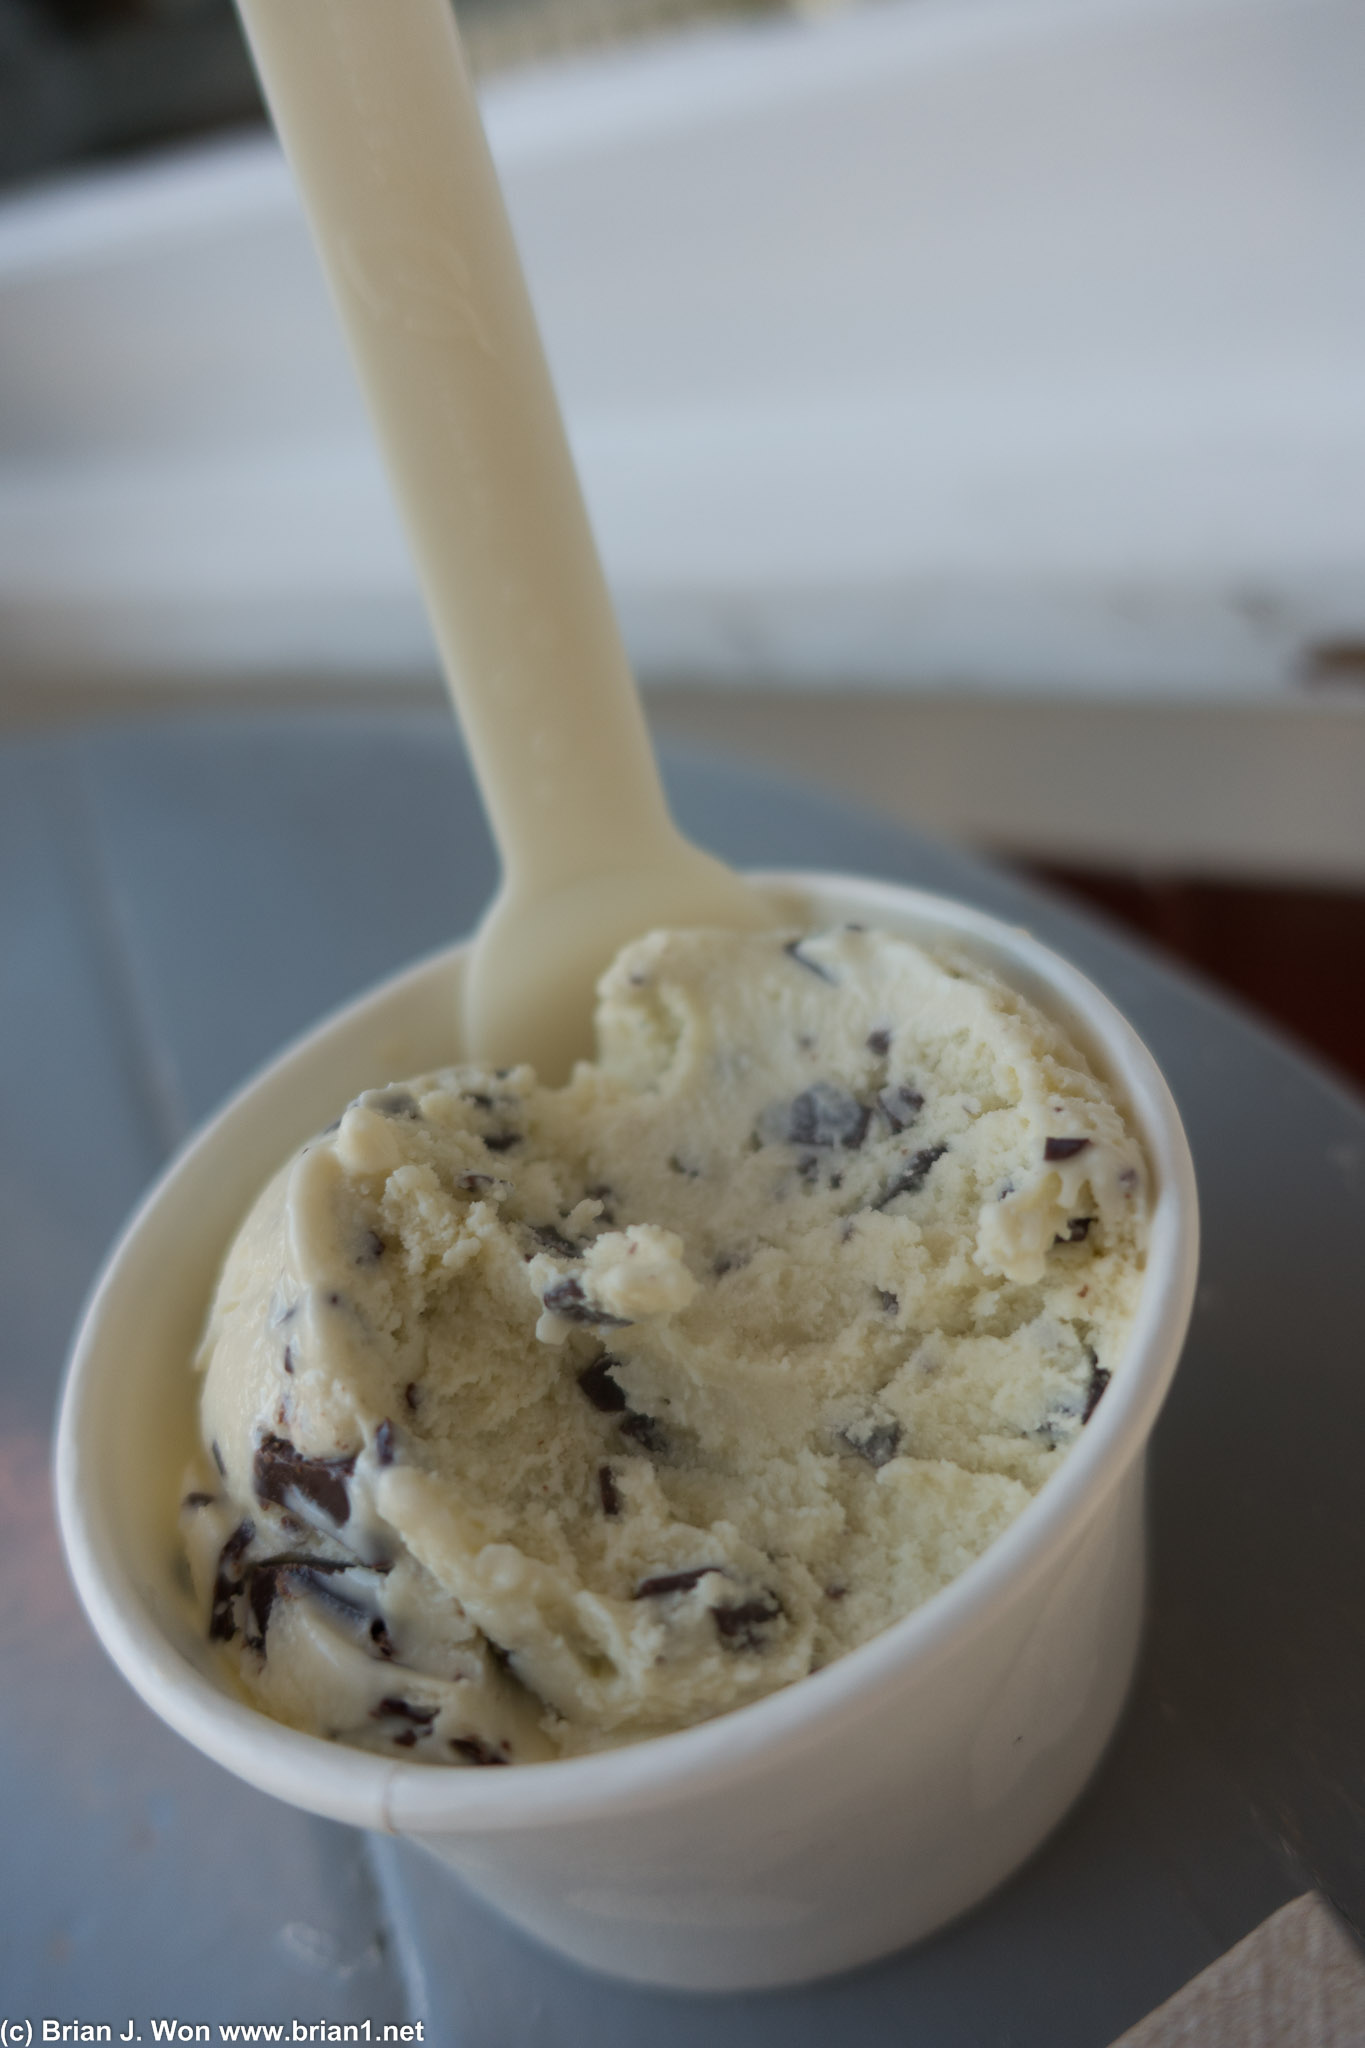 MInt chip at Sweet Rose Creamery in Brentwood. Good but more smooth/subtle than strong.